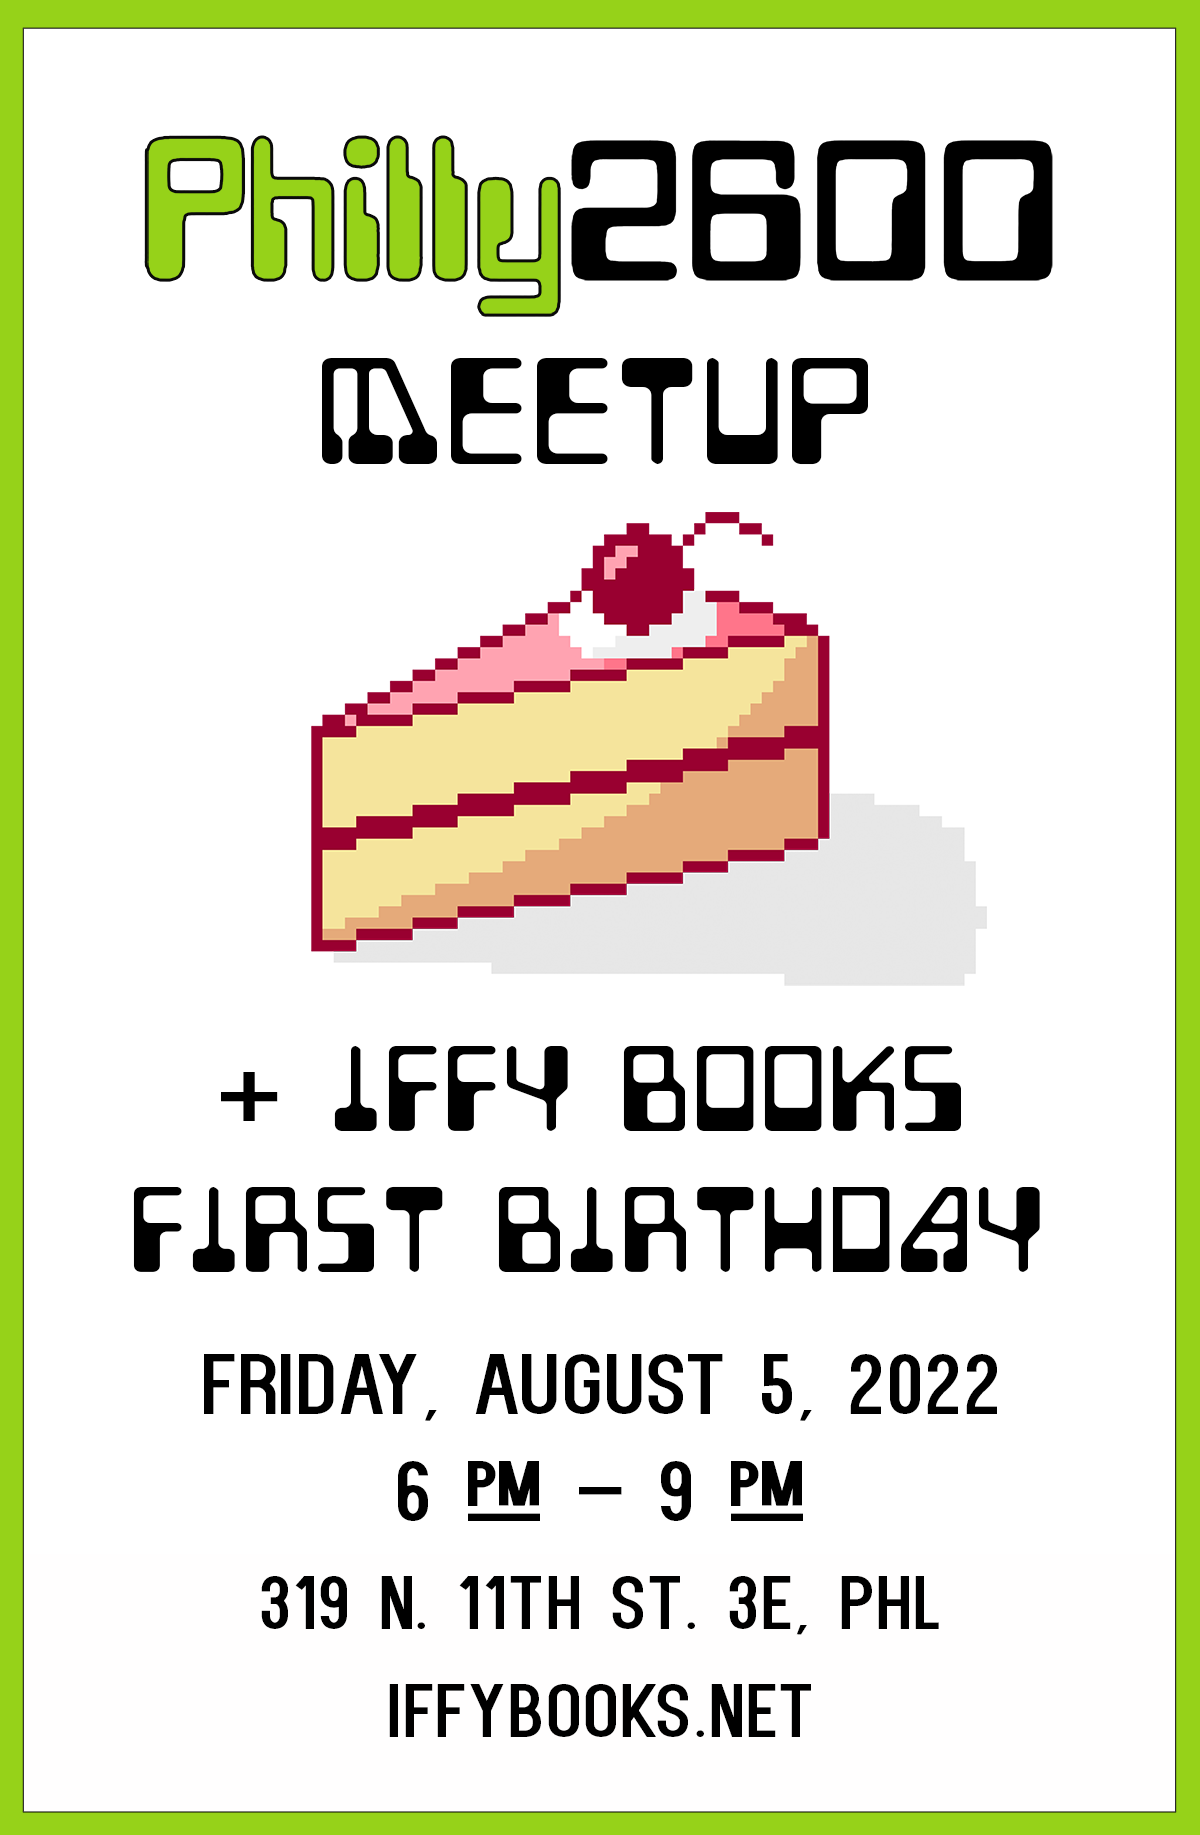 Flyer with a pixel art illustration of a slice of cake with pink frosting and a cherry on top, with the following text: Philly 2600 Meetup + Iffy Books 1st Birthday / Friday, August 5, 2022 / 6 PM – 9 PM / 319 N. 11th St. 3E, PHL / iffybooks.net